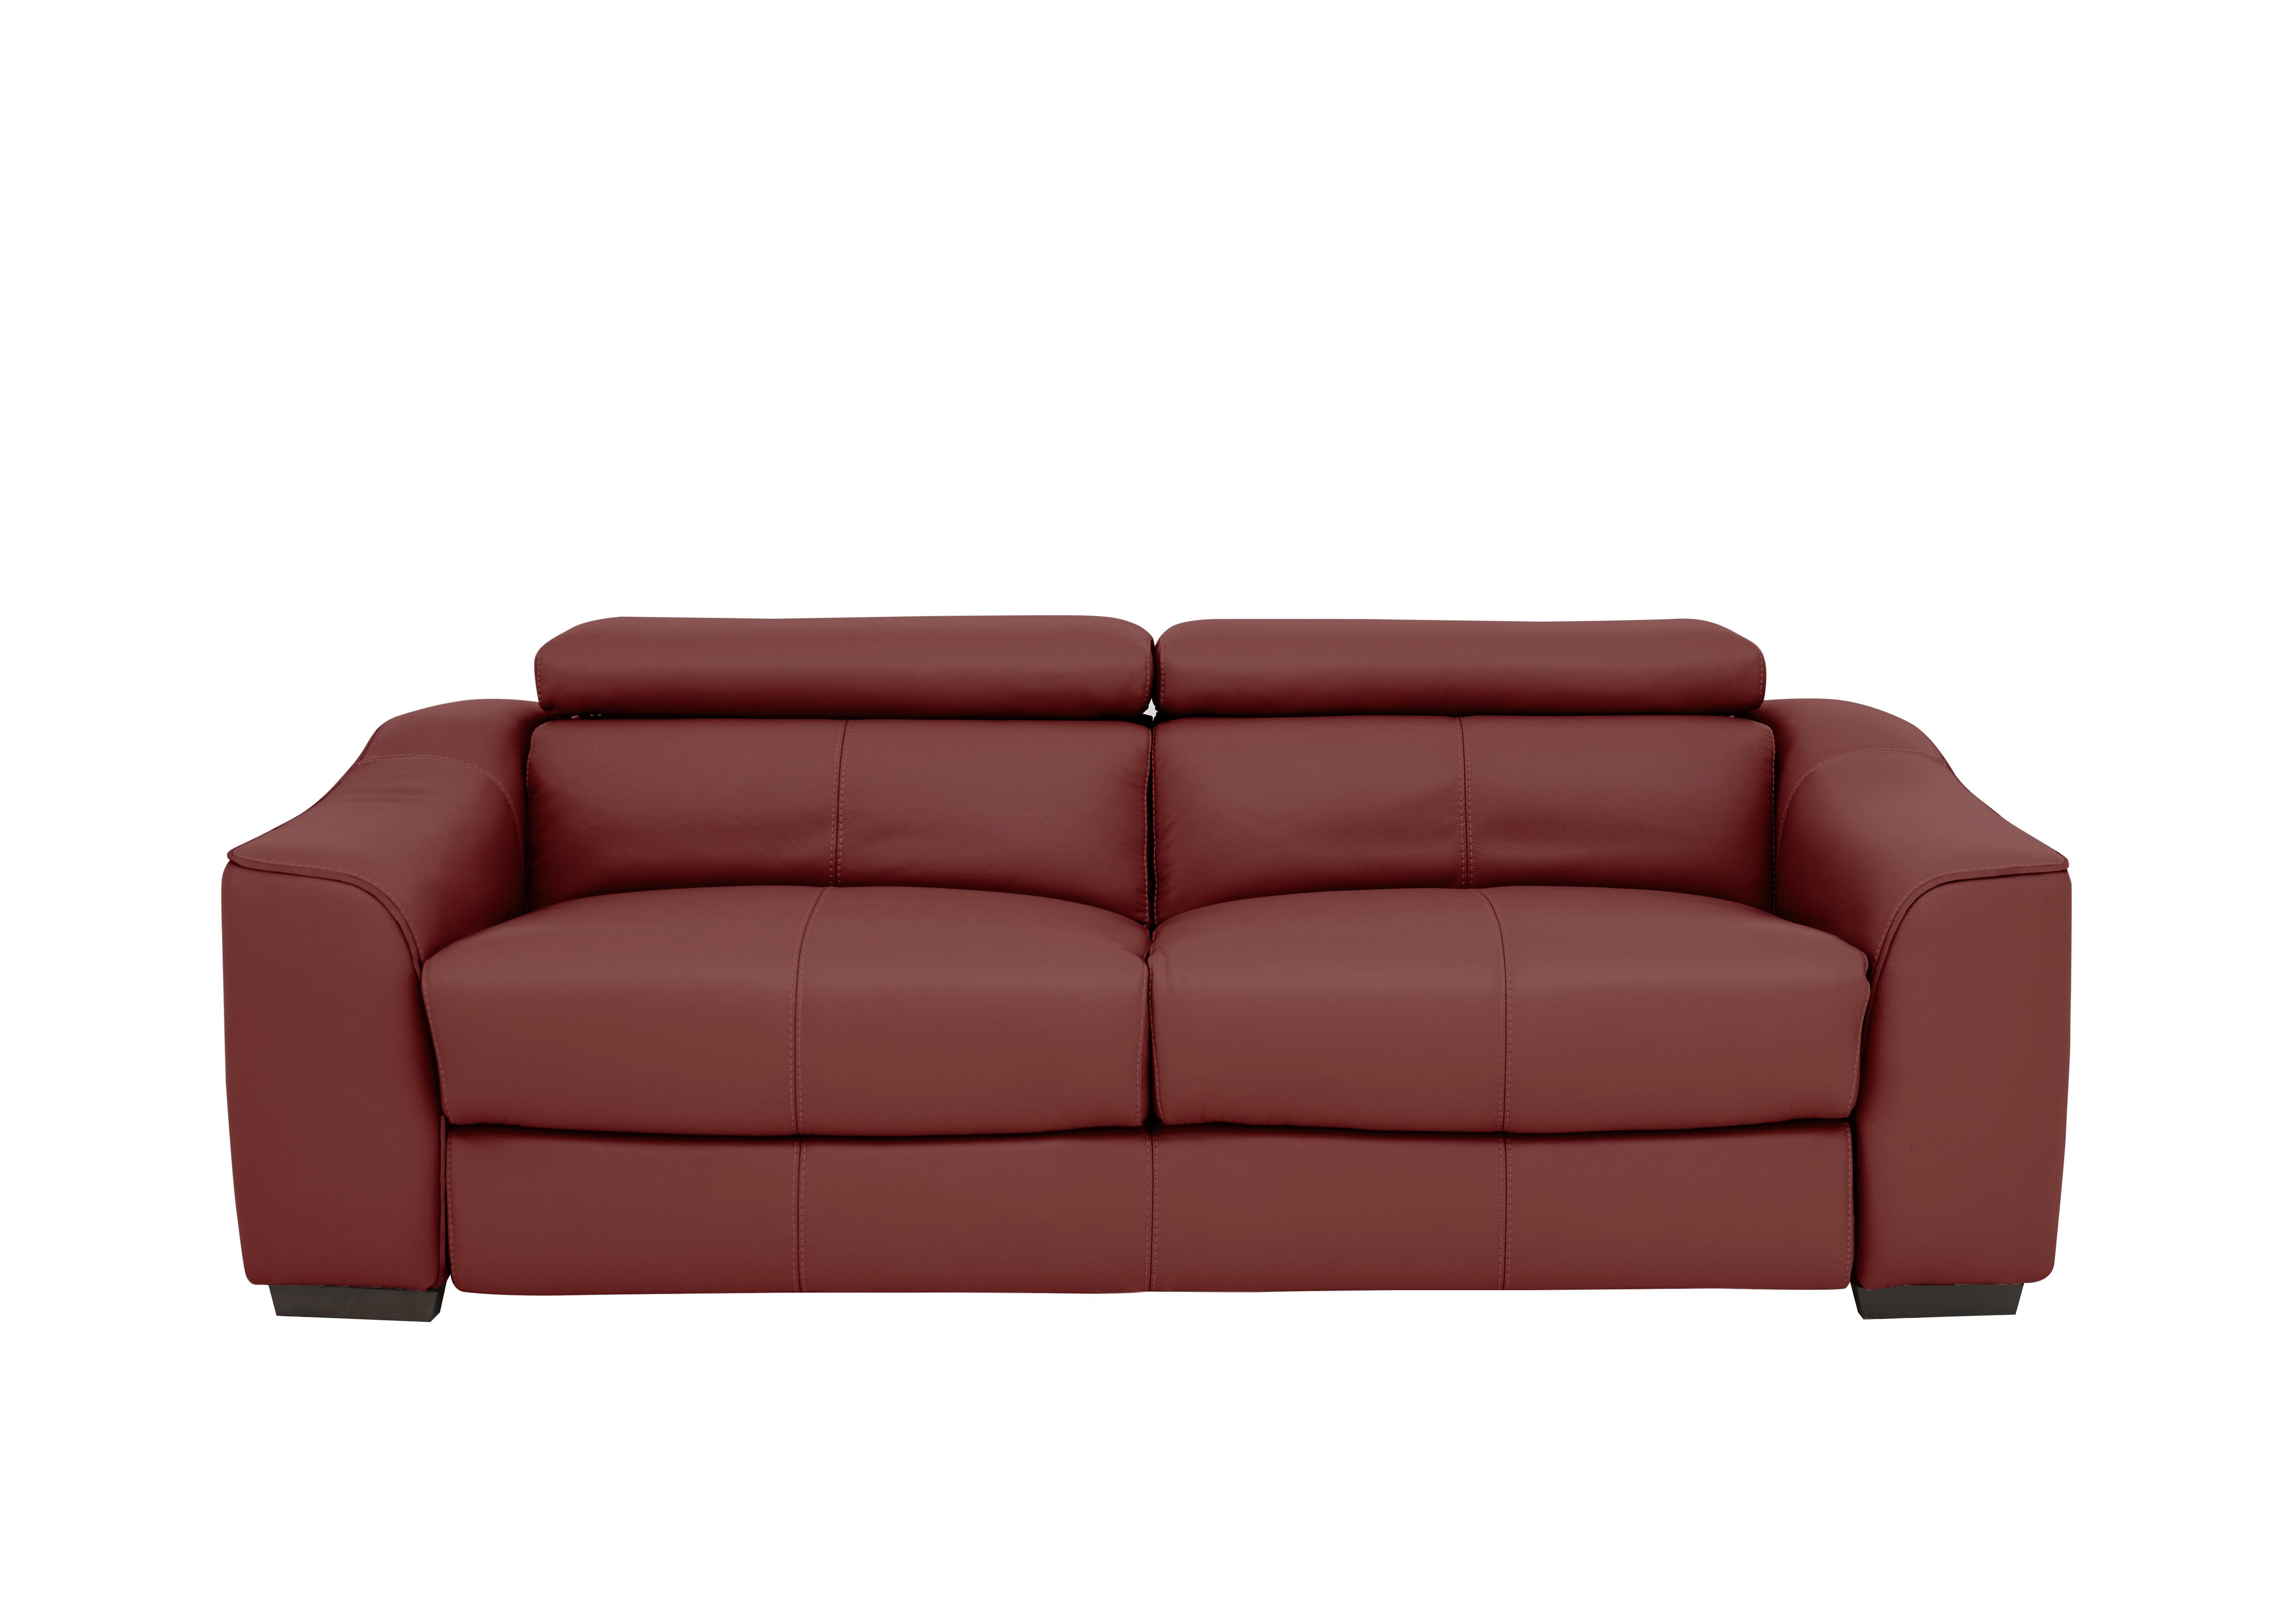 Elixir 3 Seater Leather Sofa Bed in Bv-035c Deep Red on Furniture Village